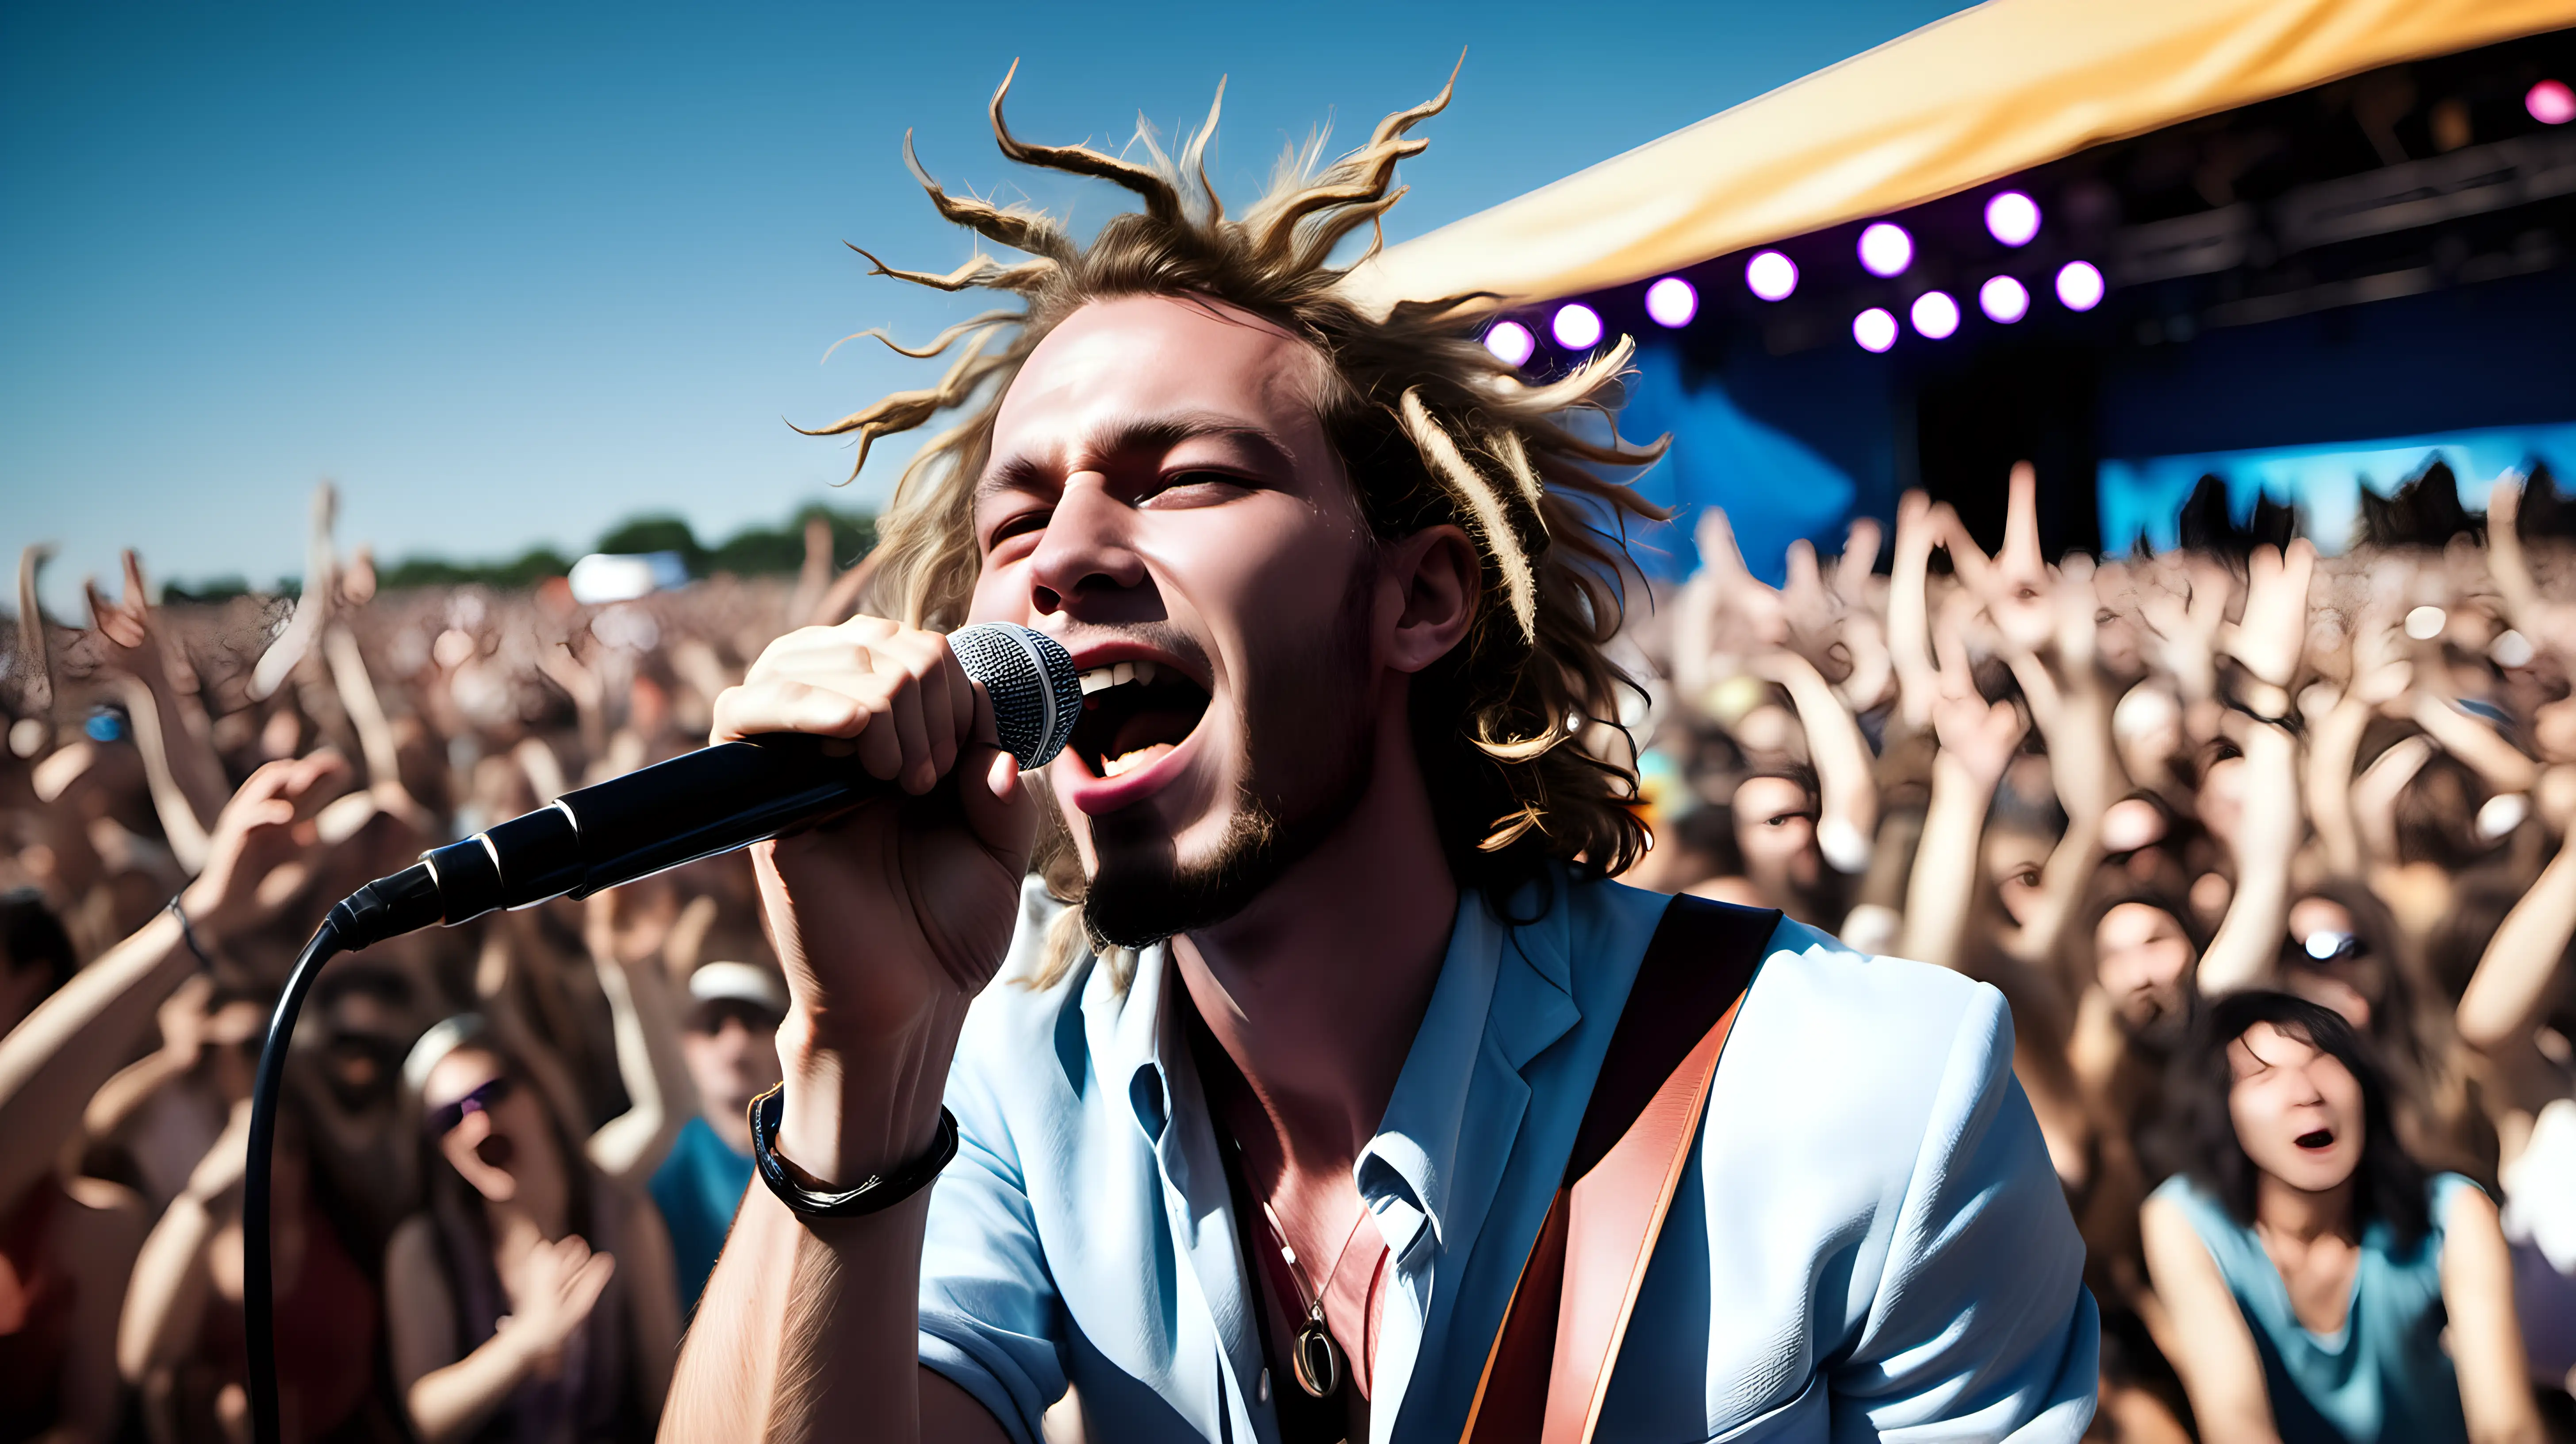 /imagine prompt: A dynamic close-up of a charismatic lead singer, similar in style to Judah of Judah and the Lion, energetically performing at a daytime open-air festival, with a blurred crowd in the background under a clear blue sky. Created Using: Expressive facial features, mid-action pose, casual bohemian festival attire, depth of field effect, sunlit stage, audience in daytime festival attire, spontaneous and lively atmosphere --ar 3:4 --v 6.0